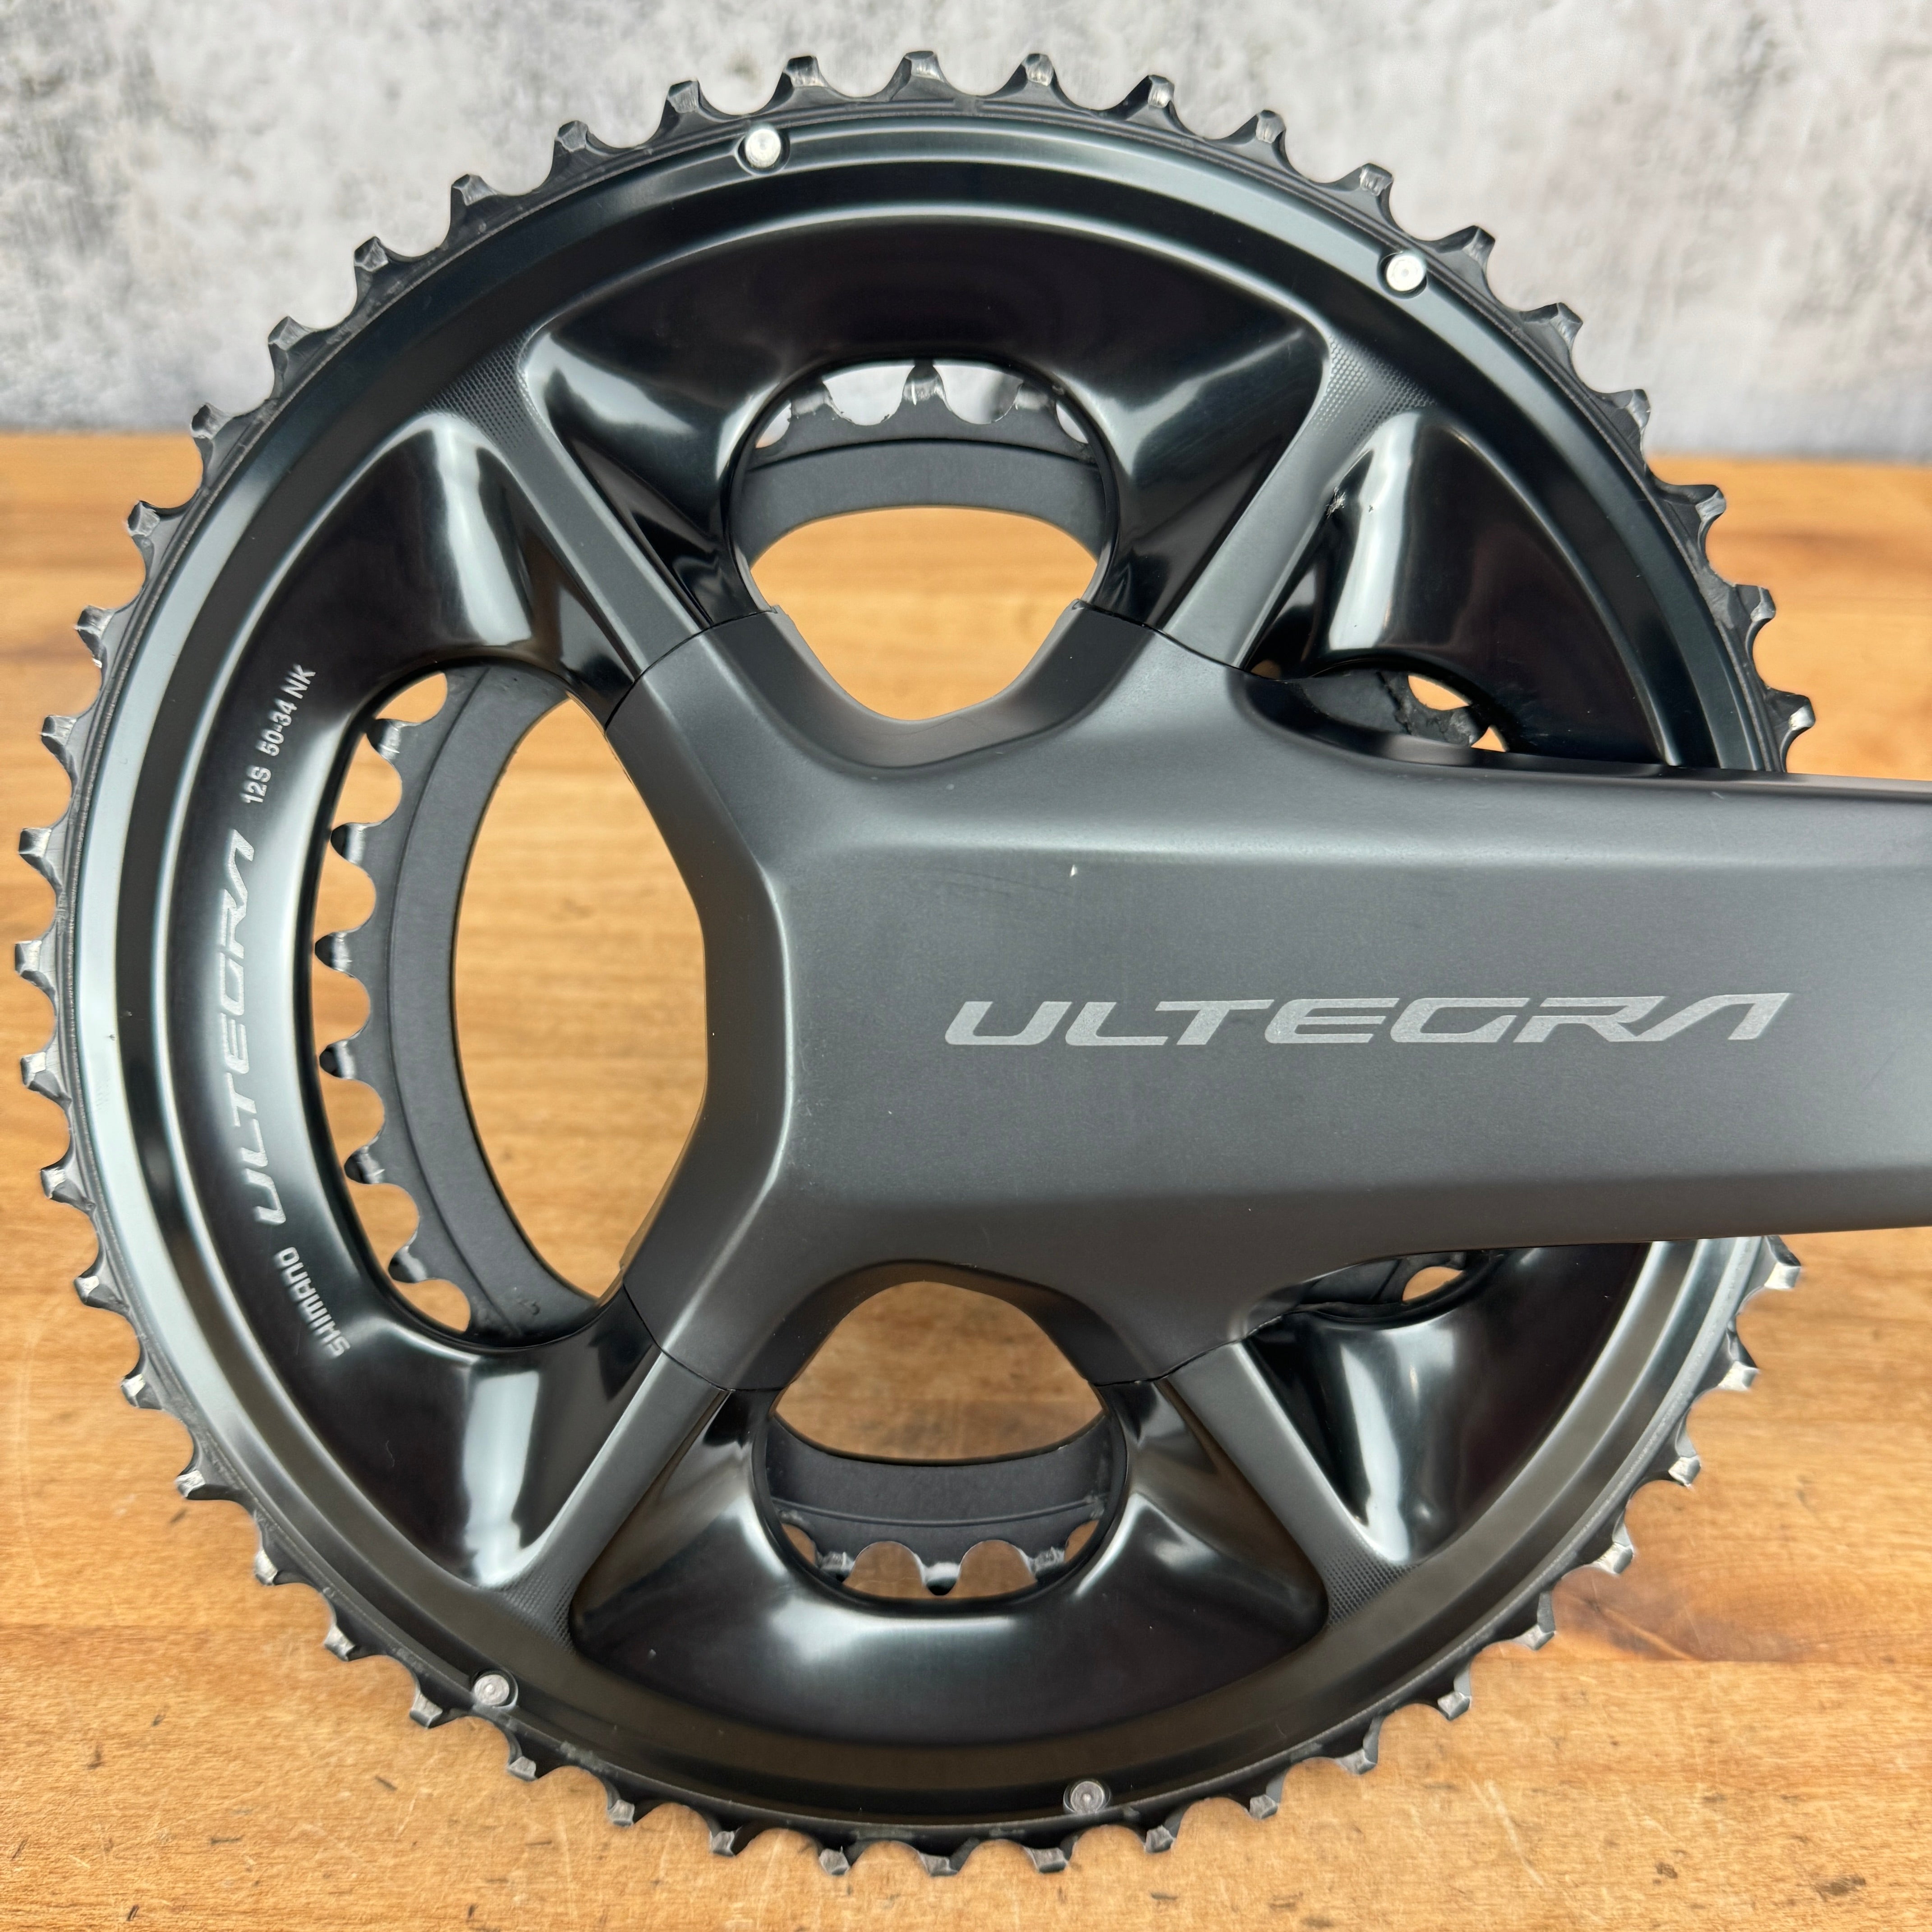 Shimano Ultegra FC-R8100 12-Speed 172.5mm 50/34 Stages Left Power